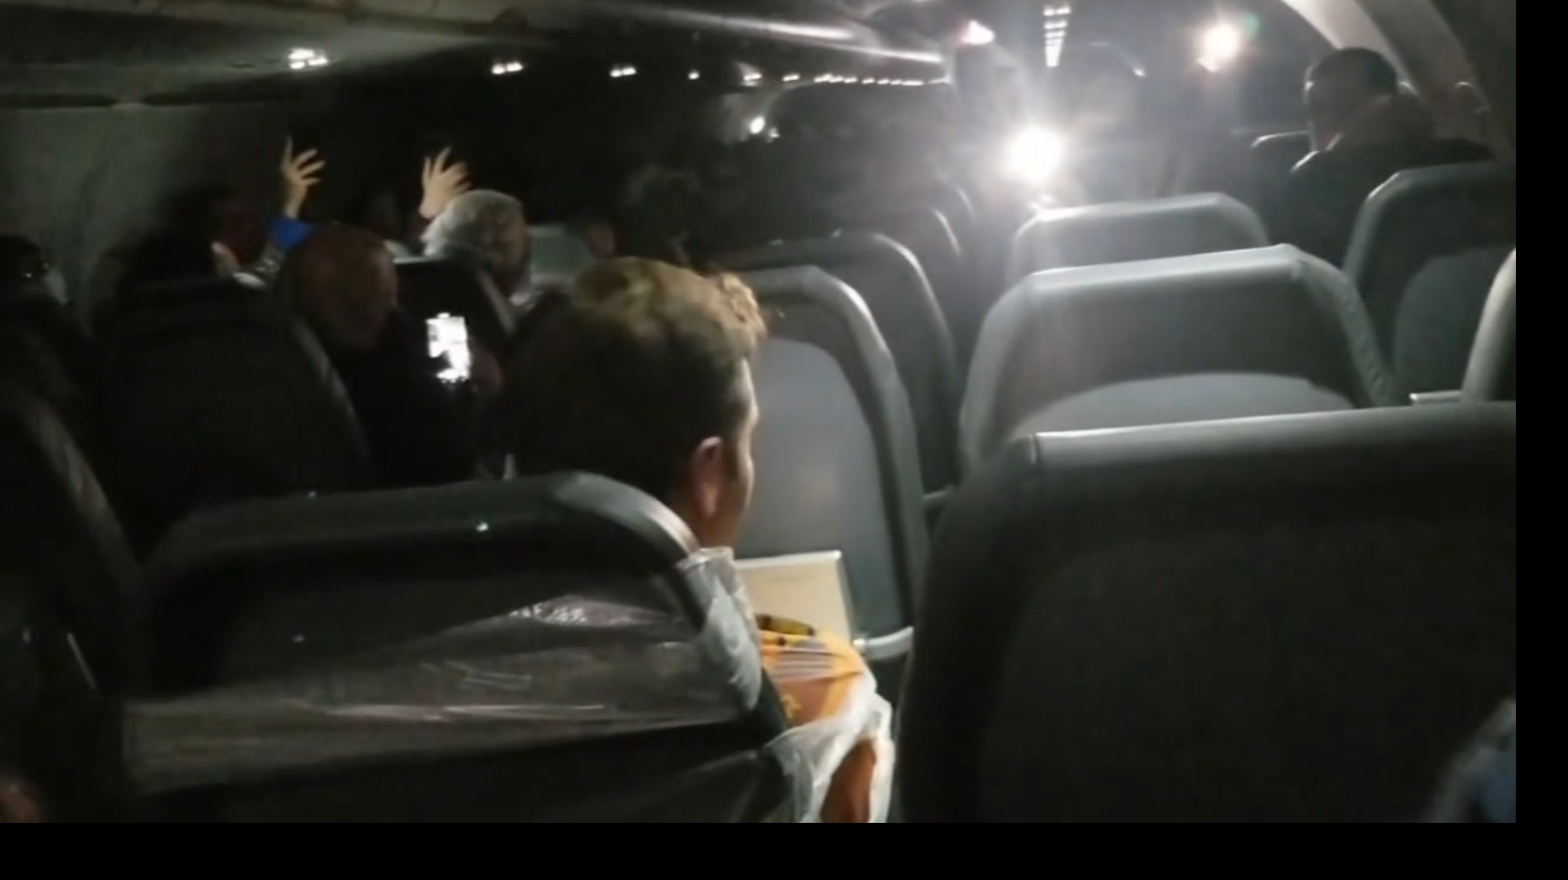 Video showing a man identified as 22-year-old Maxwell Berry on a Frontier Airlines flight from Philadelphia to Miami, after being forcibly restrained with duct tape for allegedly assaulting flight attendants. (Screenshot: ABC 6, Fair Use)